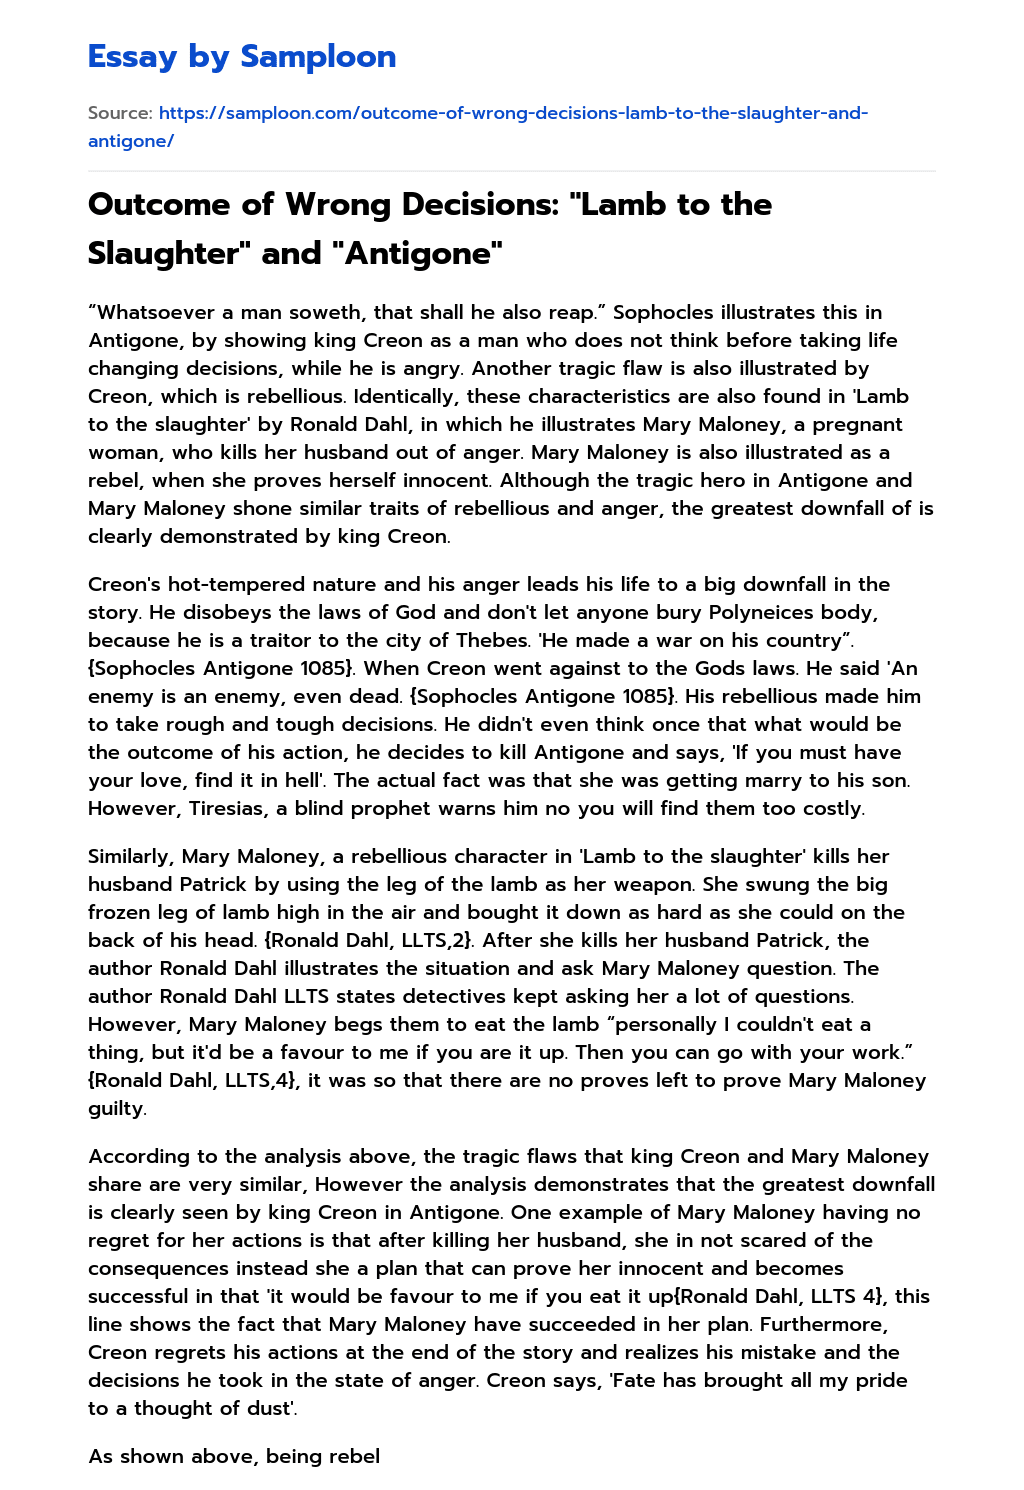 Outcome of Wrong Decisions: “Lamb to the Slaughter” and “Antigone” Analytical Essay essay